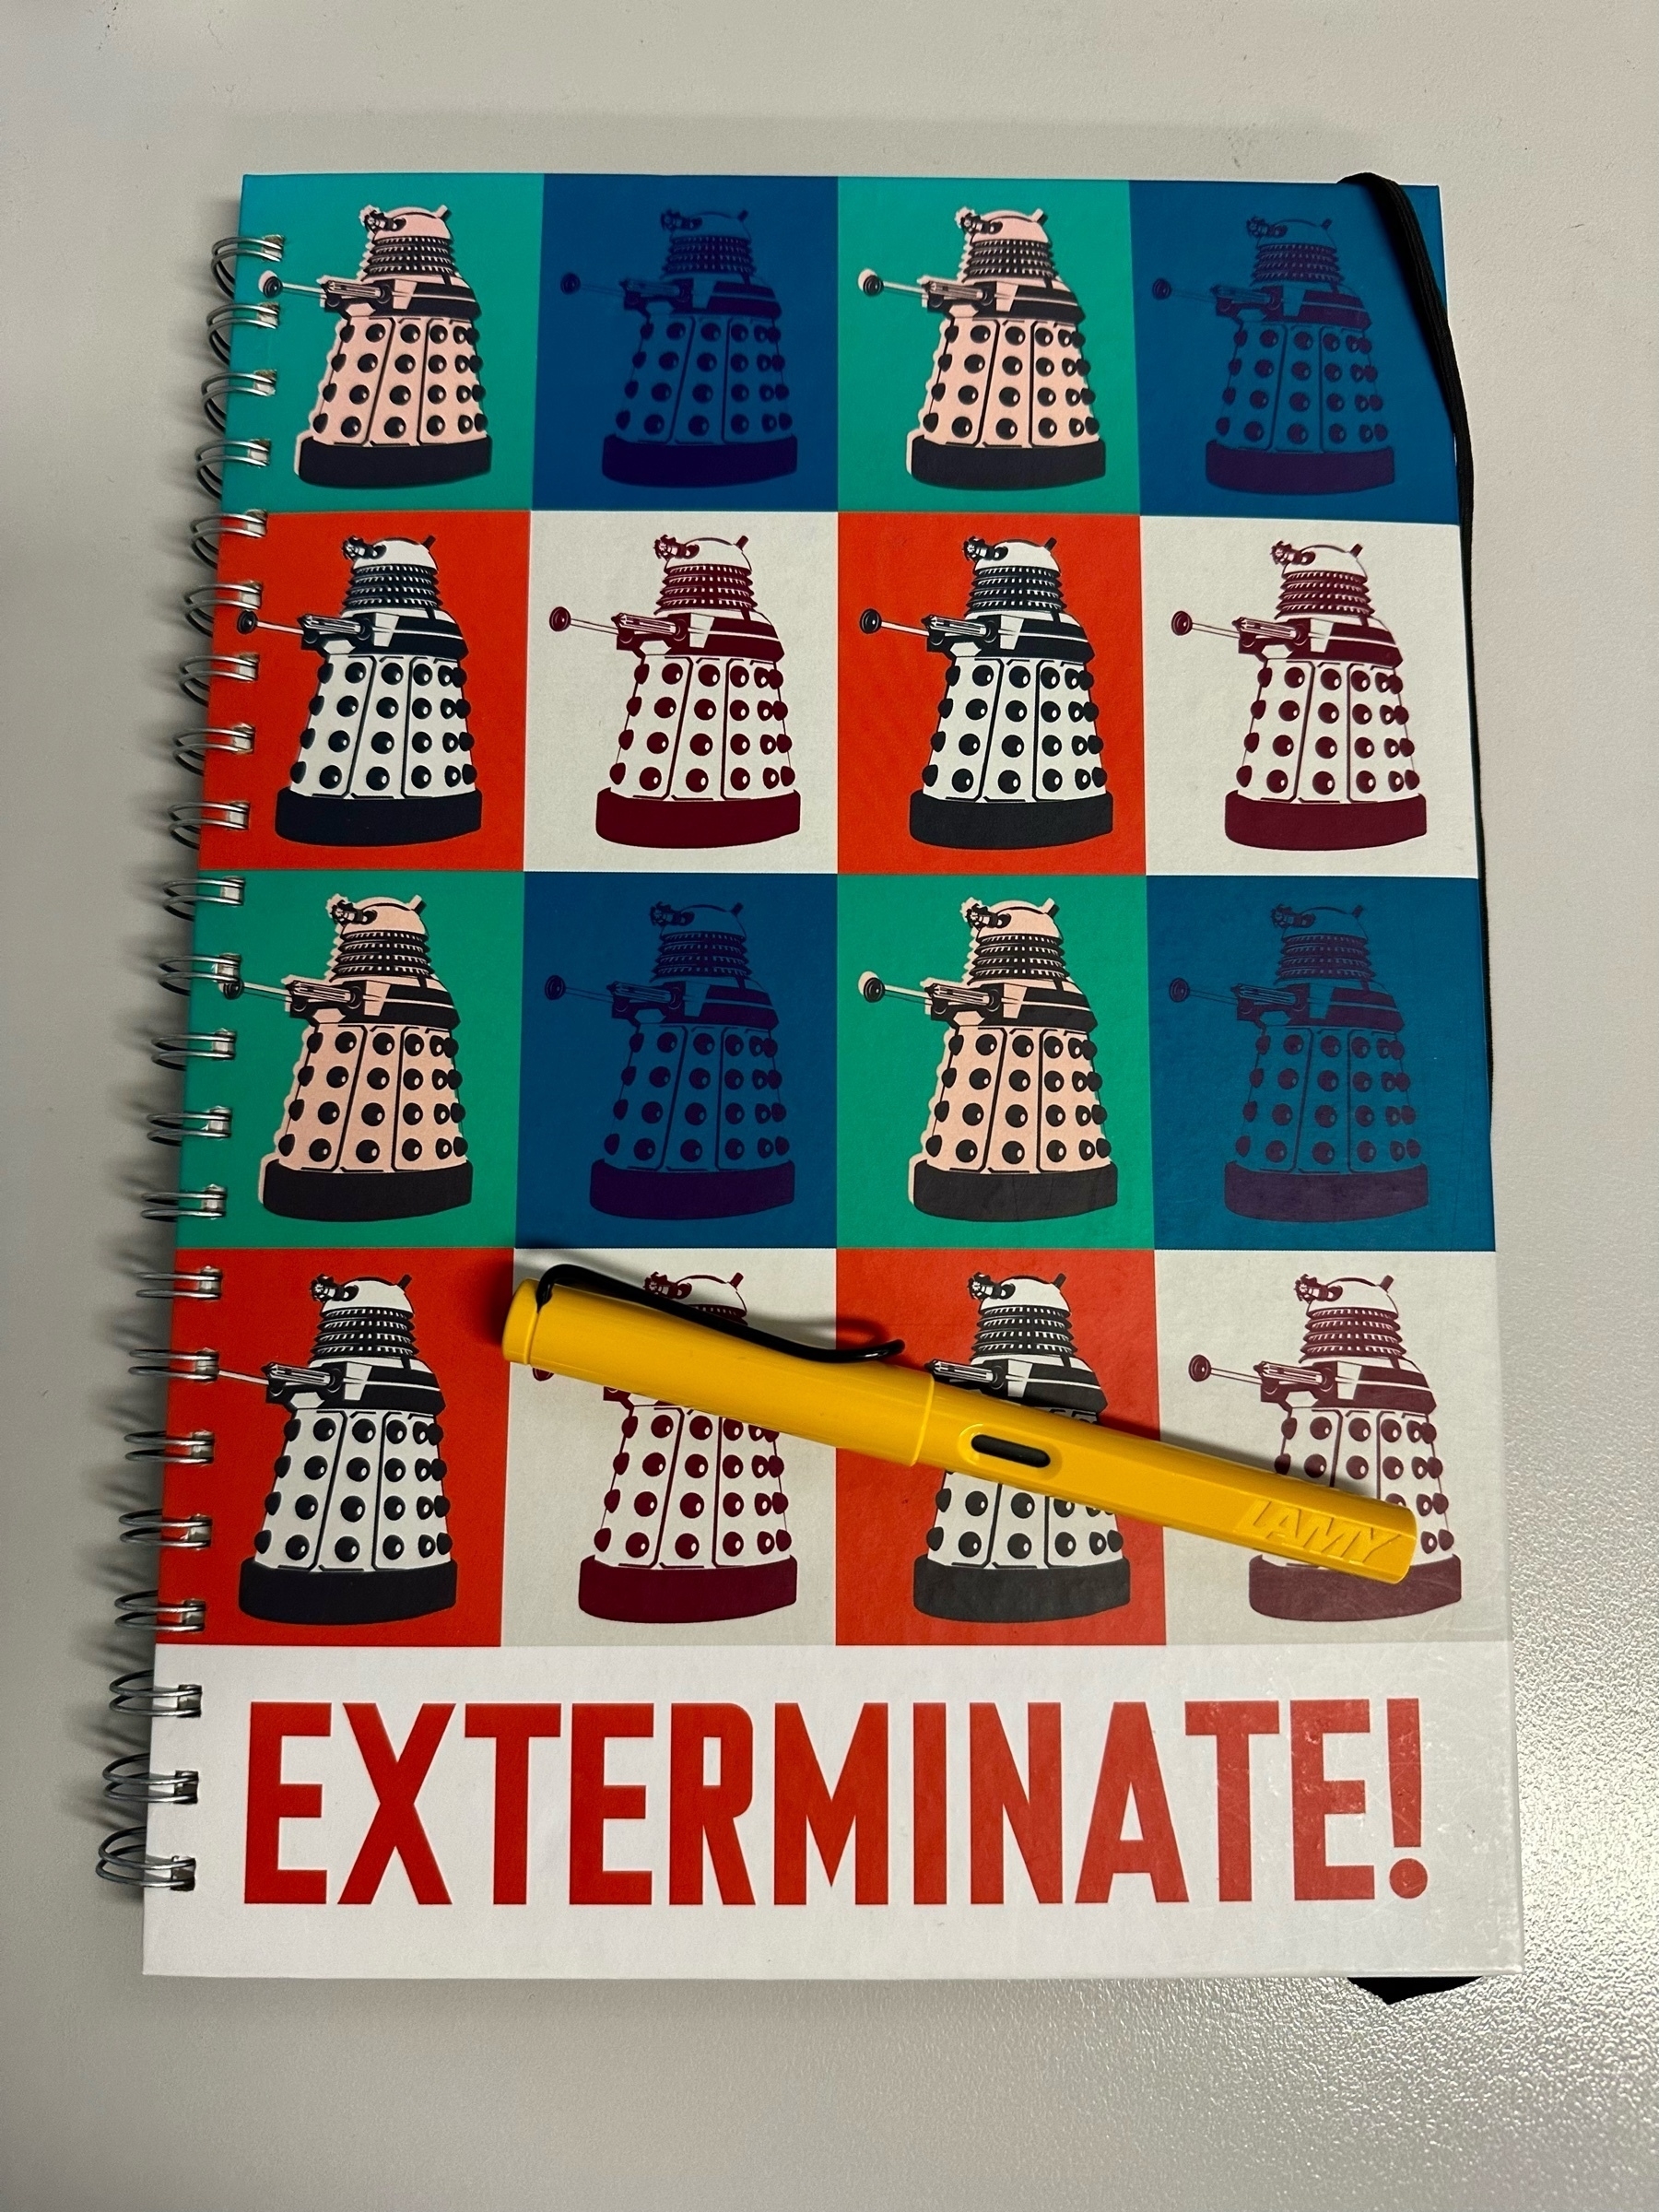 A spiral bound A4 hardcover notebook. There is a 4x4 grid of squares of different colours with a Dalek inside each one. Across the bottom is Exterminate! in red capital letters. A yellow pen is sitting on the book.